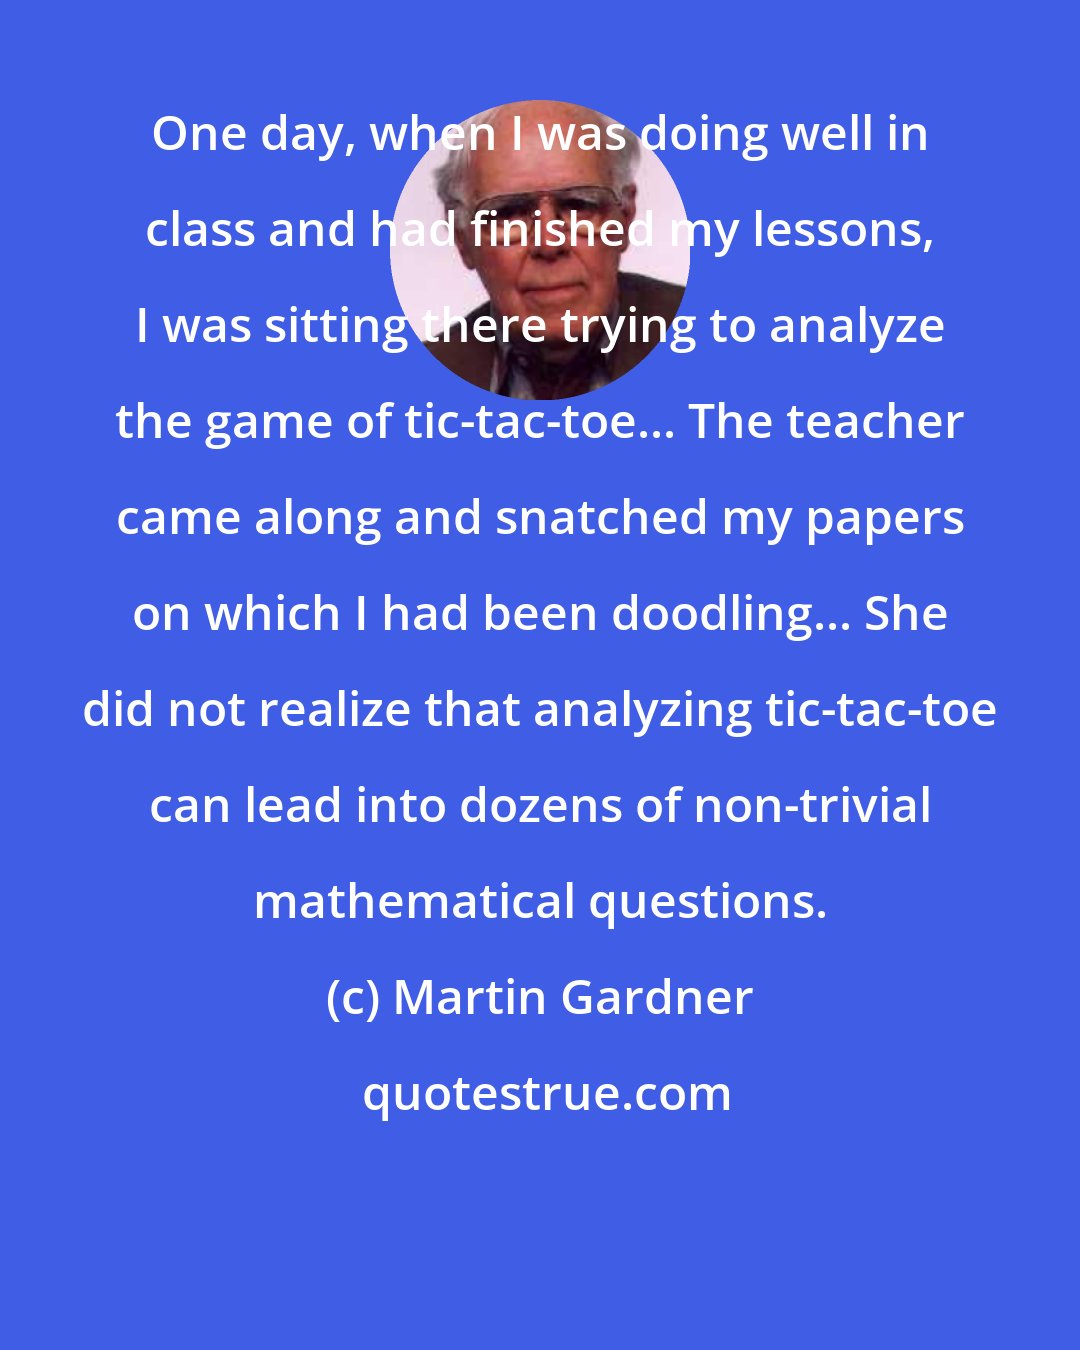 Martin Gardner: One day, when I was doing well in class and had finished my lessons, I was sitting there trying to analyze the game of tic-tac-toe... The teacher came along and snatched my papers on which I had been doodling... She did not realize that analyzing tic-tac-toe can lead into dozens of non-trivial mathematical questions.